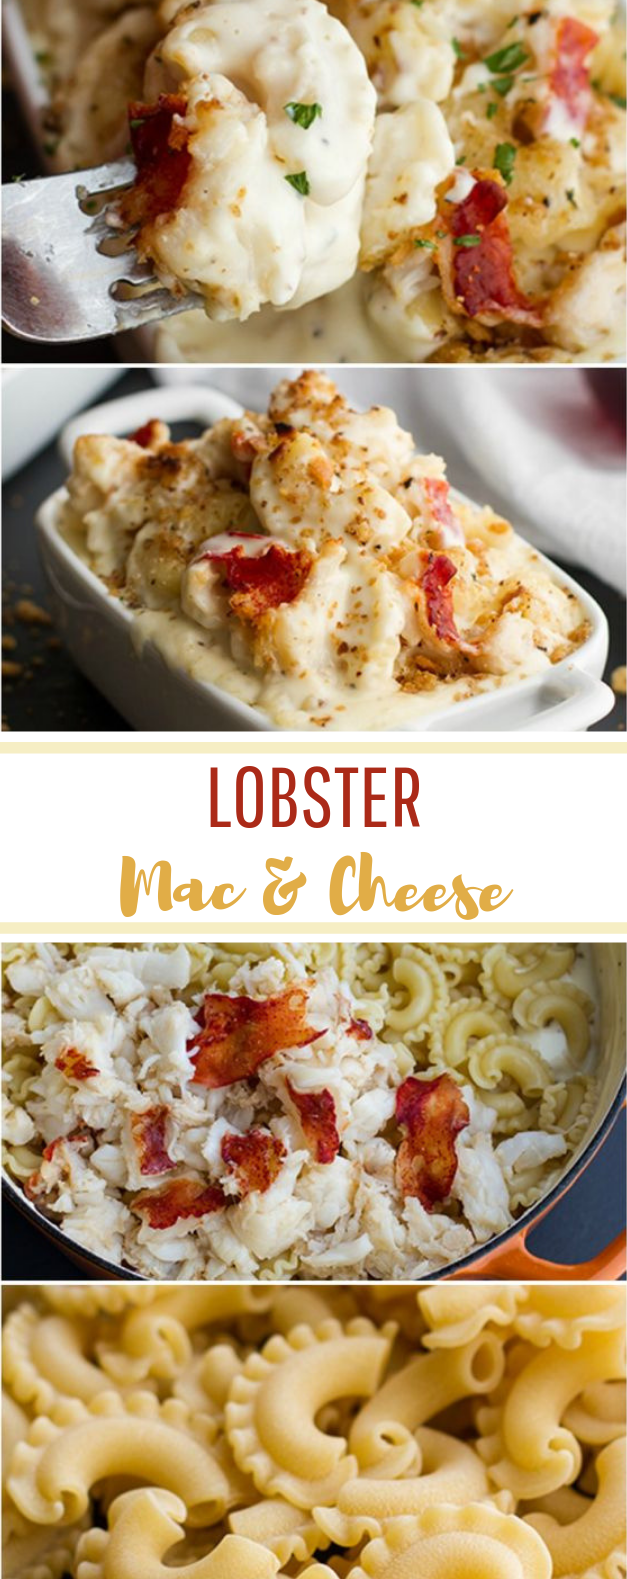 Lobster Mac and Cheese #romantic #dinner